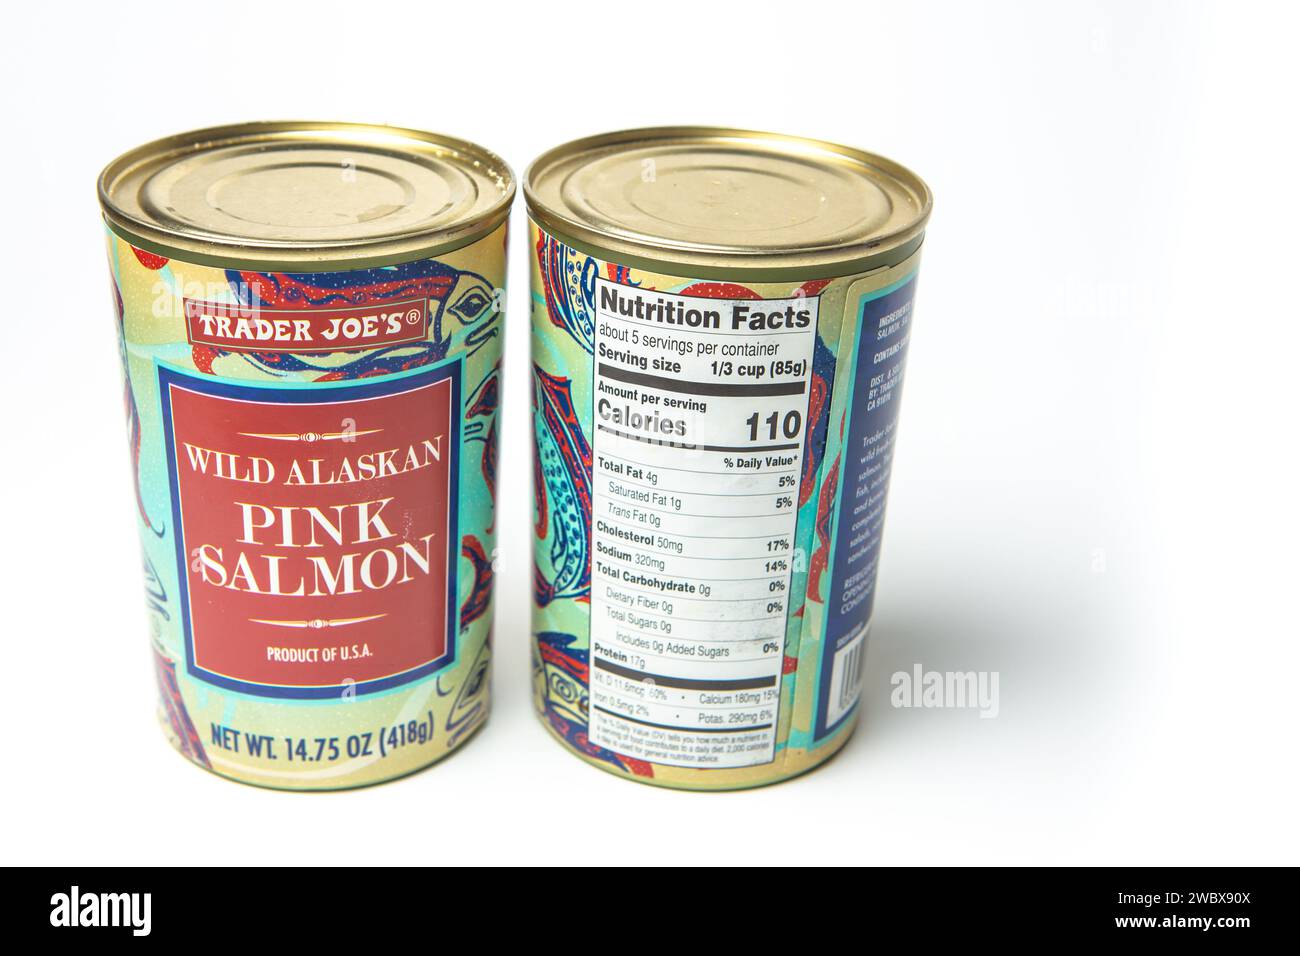 Trader Joes Canned Alaskan pink salmon and nutrition facts white background Stock Photo